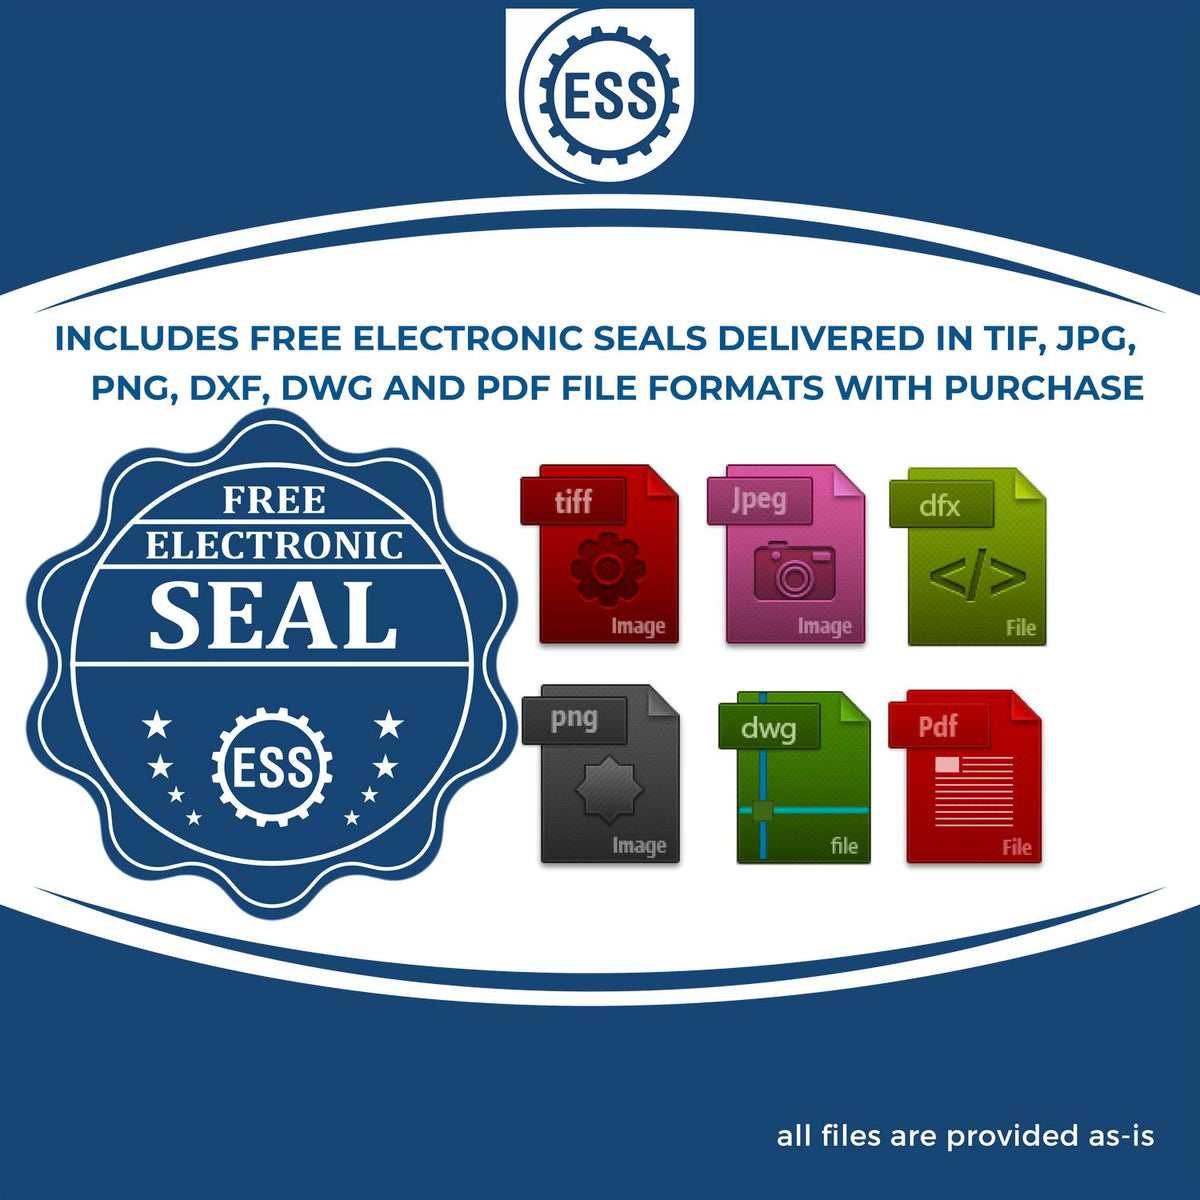 An infographic for the free electronic seal for the Slim Pre-Inked New Hampshire Landscape Architect Seal Stamp illustrating the different file type icons such as DXF, DWG, TIF, JPG and PNG.